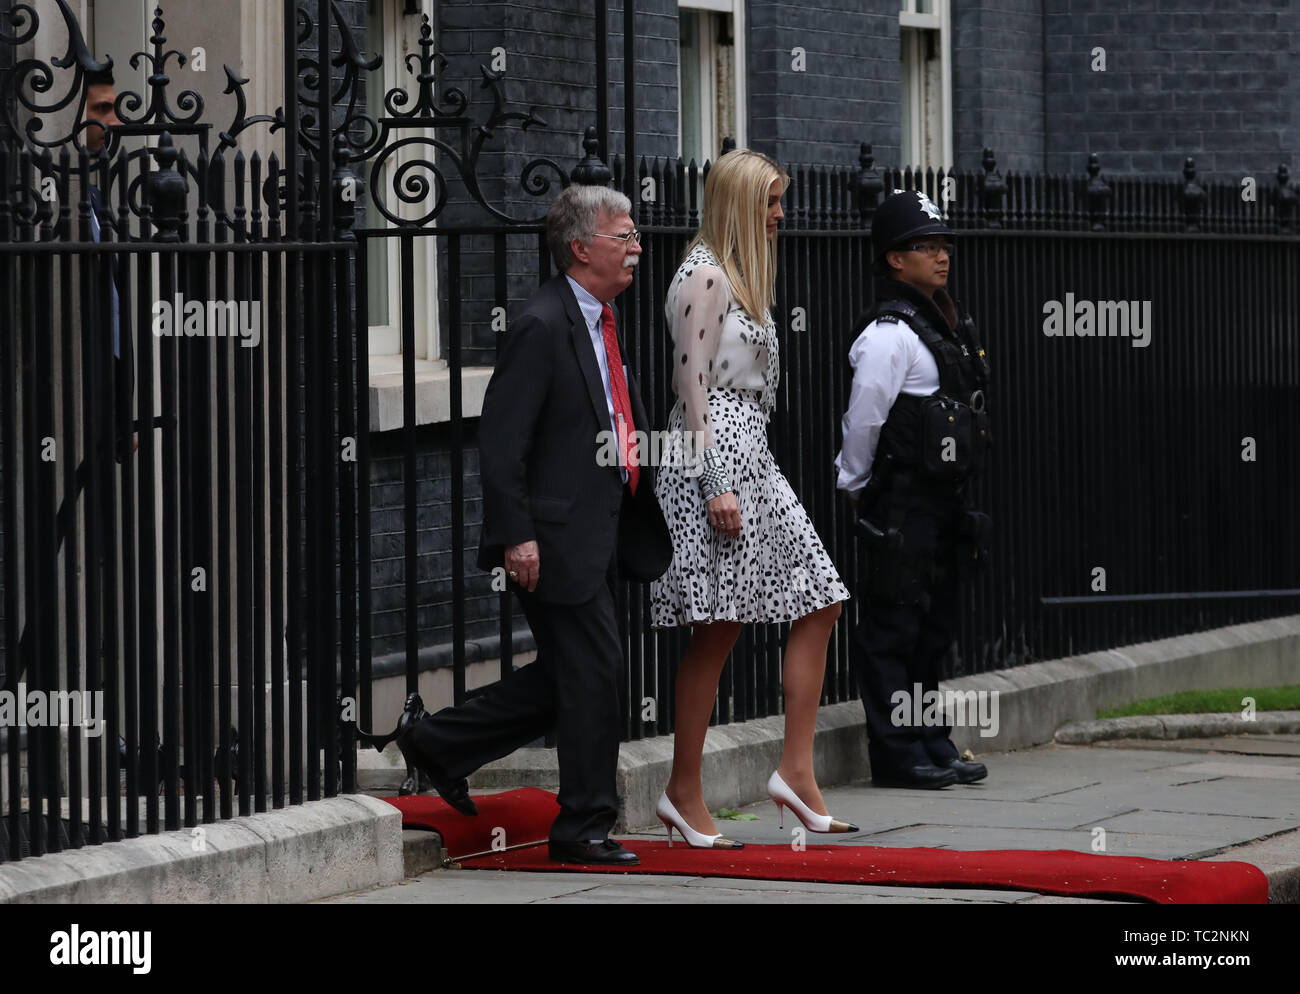 London, UK. 04th June, 2019. Ivanka Trump (White House advisor and first daughter of the United States), walks behind John Bolton (National Security Advisor), after leaving Number 10 Downing Street. The President met The Prime Minister during his state visit to the UK. Donald Trump, State visit, Downing Street, London, UK on June 4, 2019. Credit: Paul Marriott/Alamy Live News Stock Photo